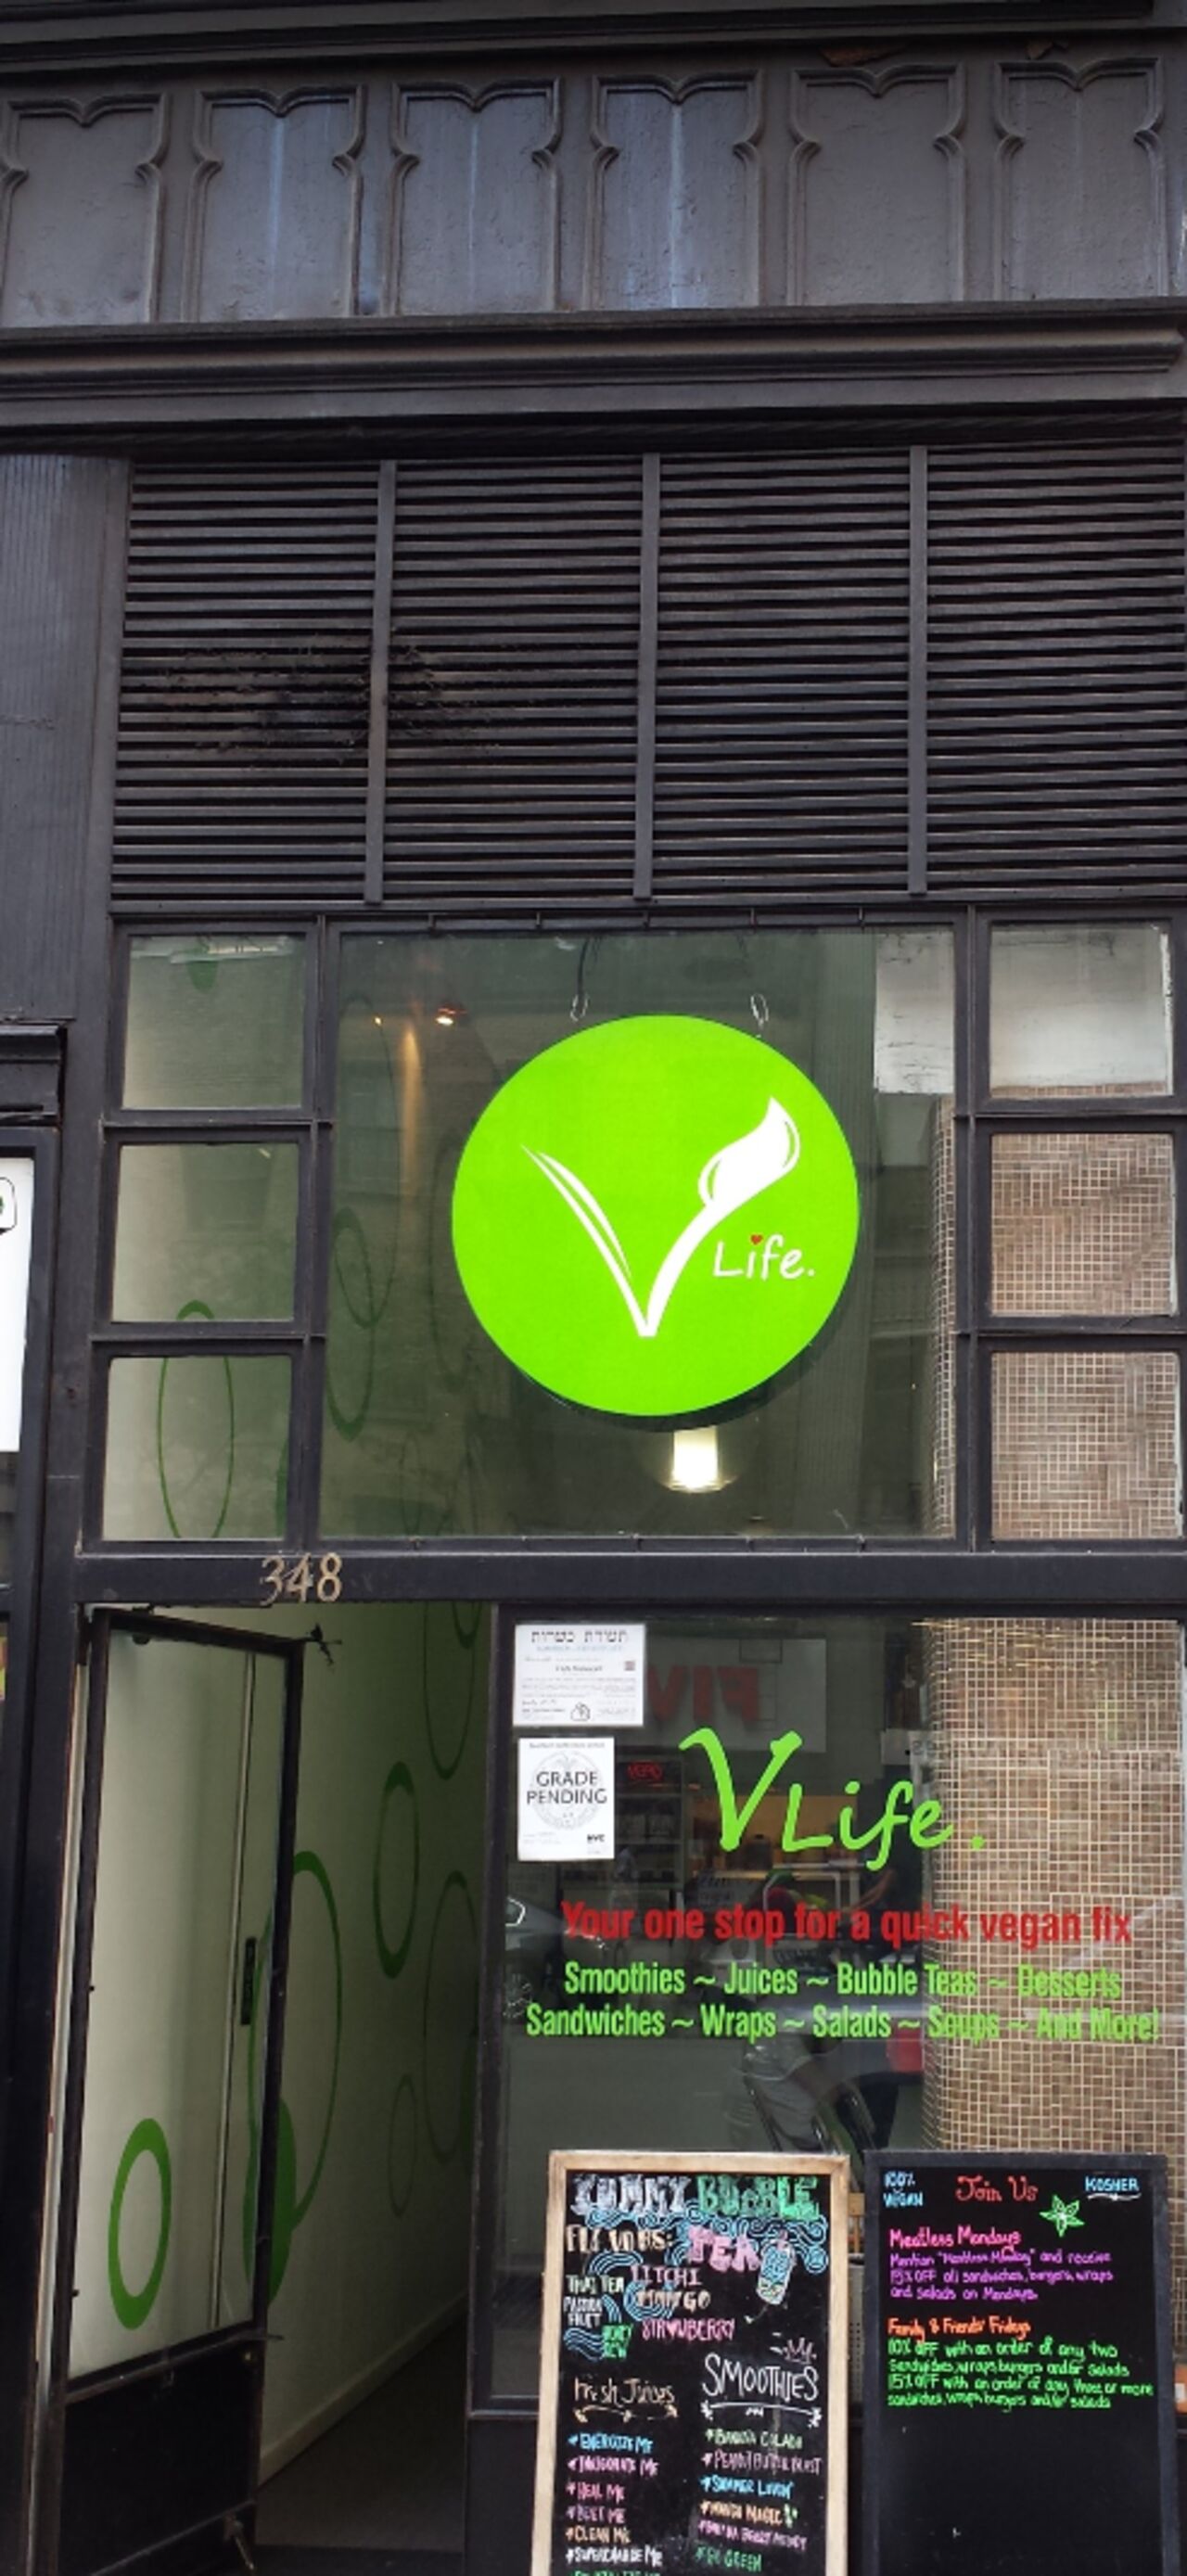 A photo of VLife